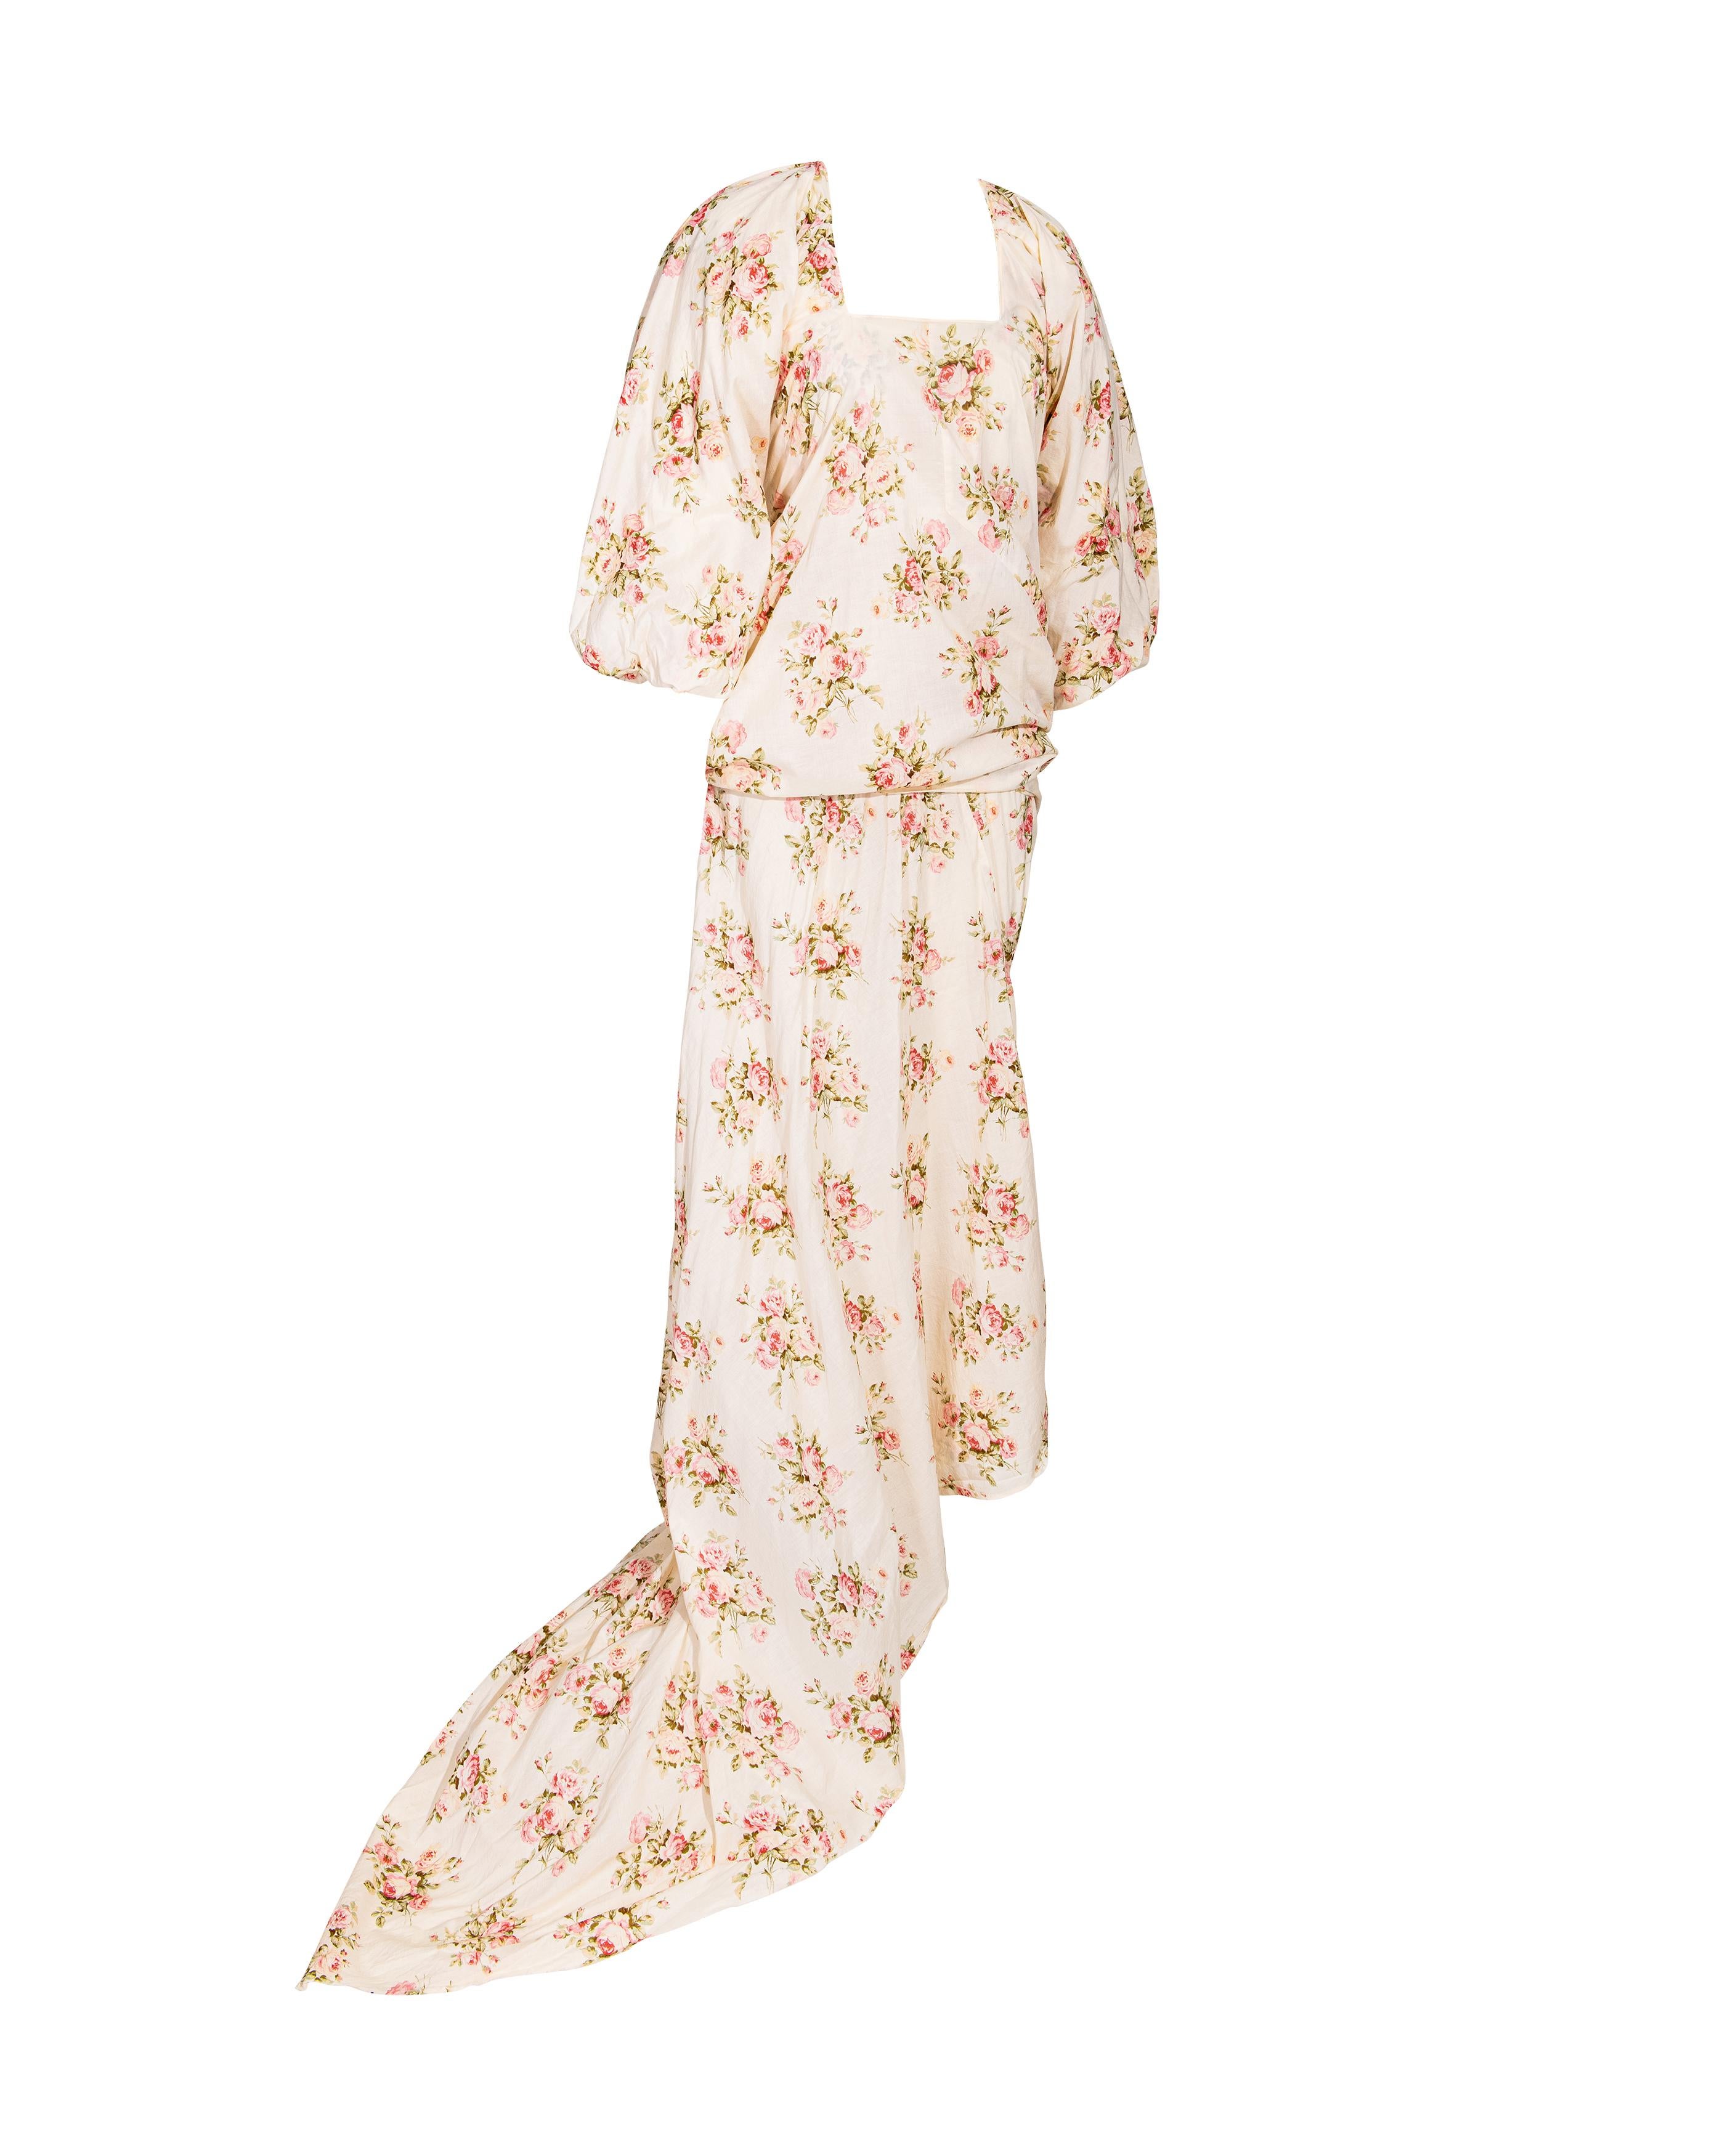 S/S 2008 Junya Watanabe Ecru Cotton Dress with Pink Floral Pattern In Excellent Condition For Sale In North Hollywood, CA